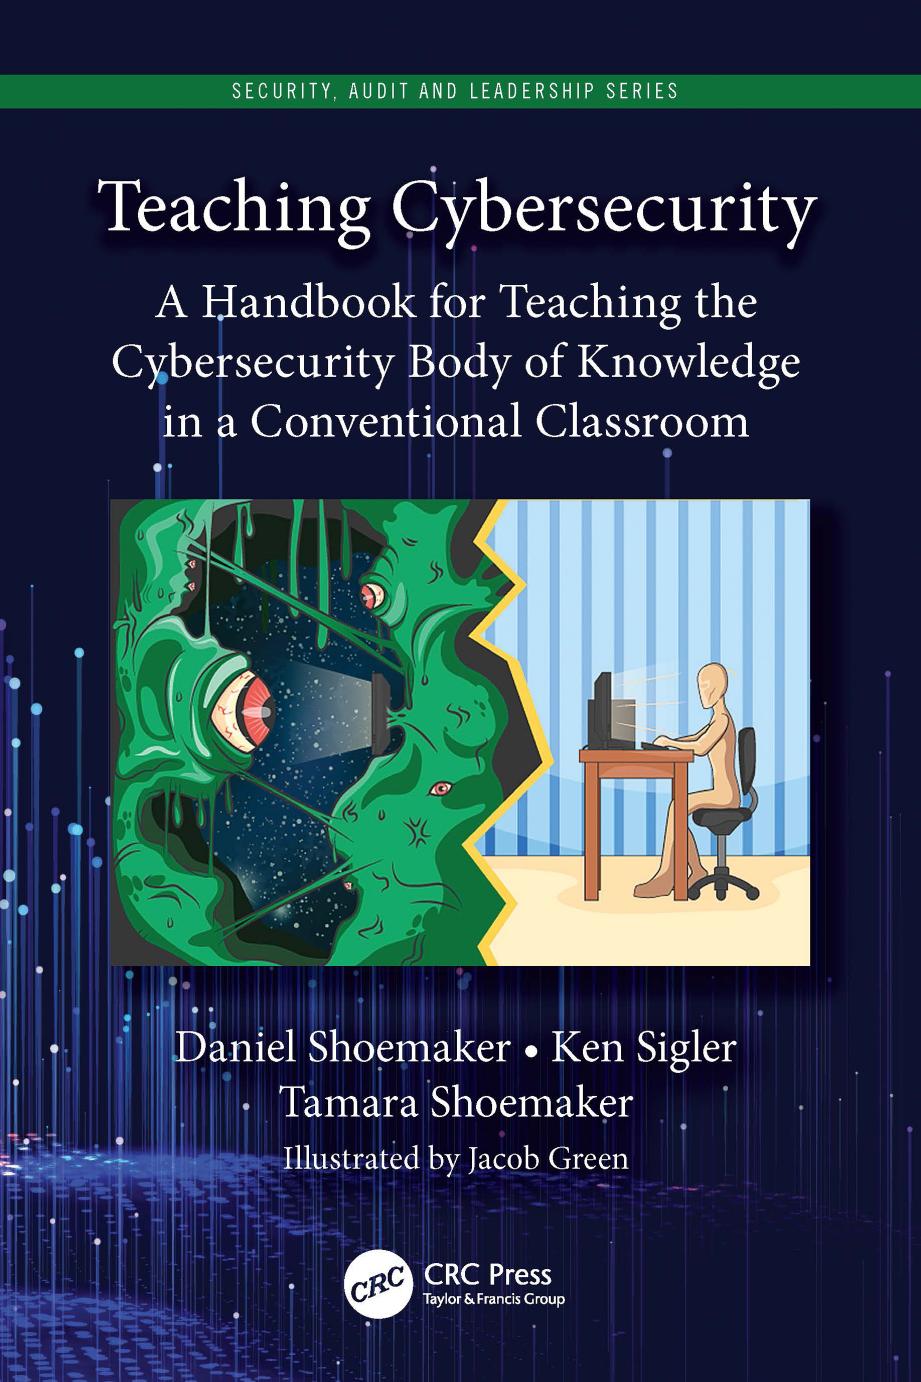 Teaching Cybersecurity: A Handbook for Teaching the Cybersecurity Body of Knowledge in a Conventional Classroom by Daniel Shoemaker & Ken Sigler & Tamara Shoemaker